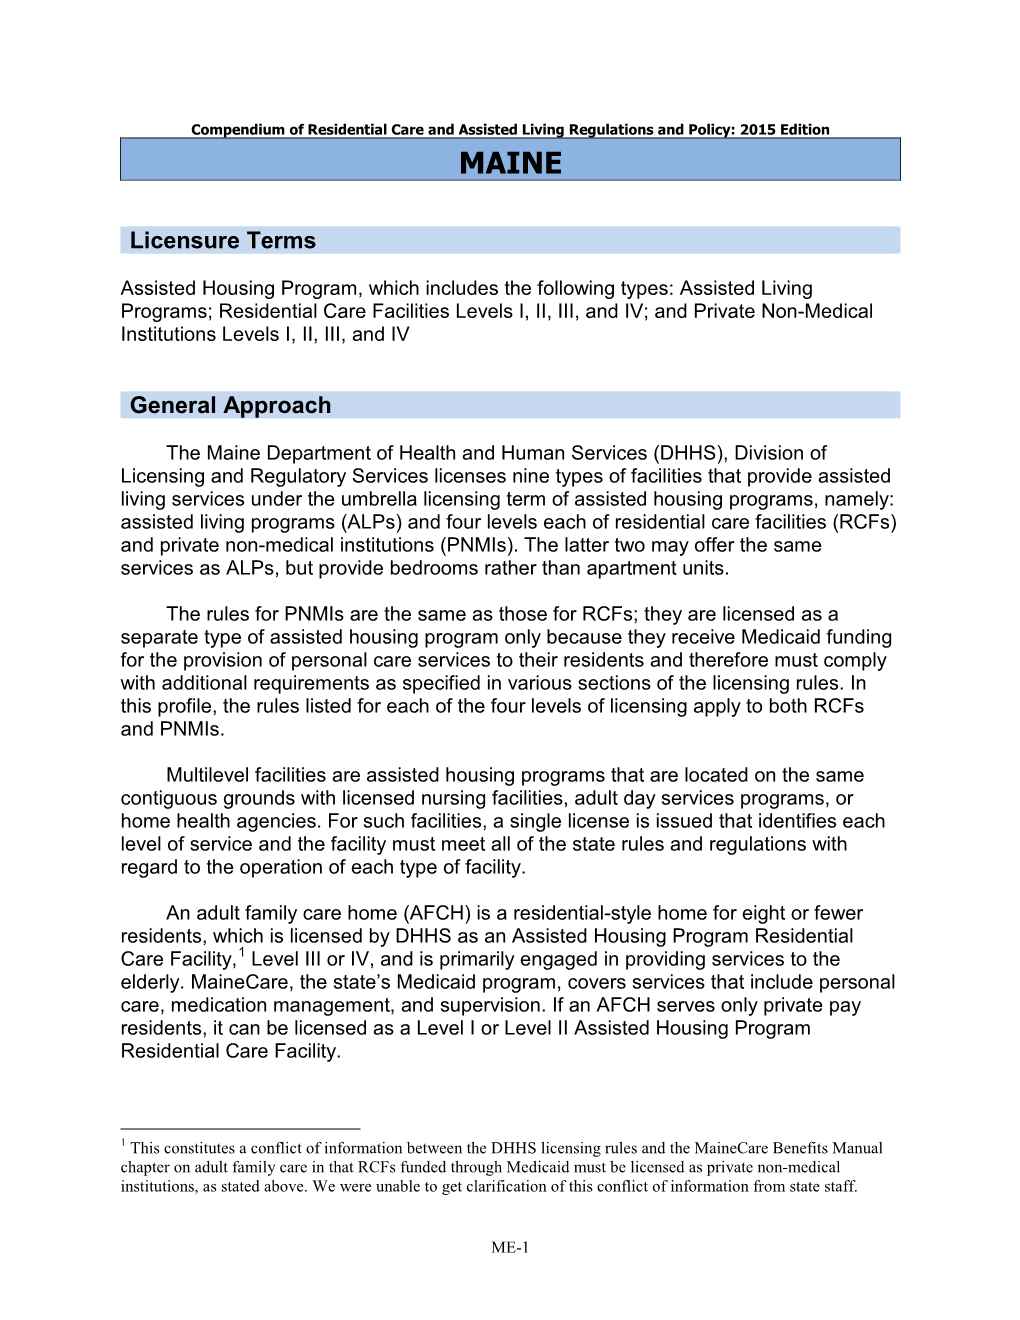 Residential Care/Assisted Living Compendium: Maine